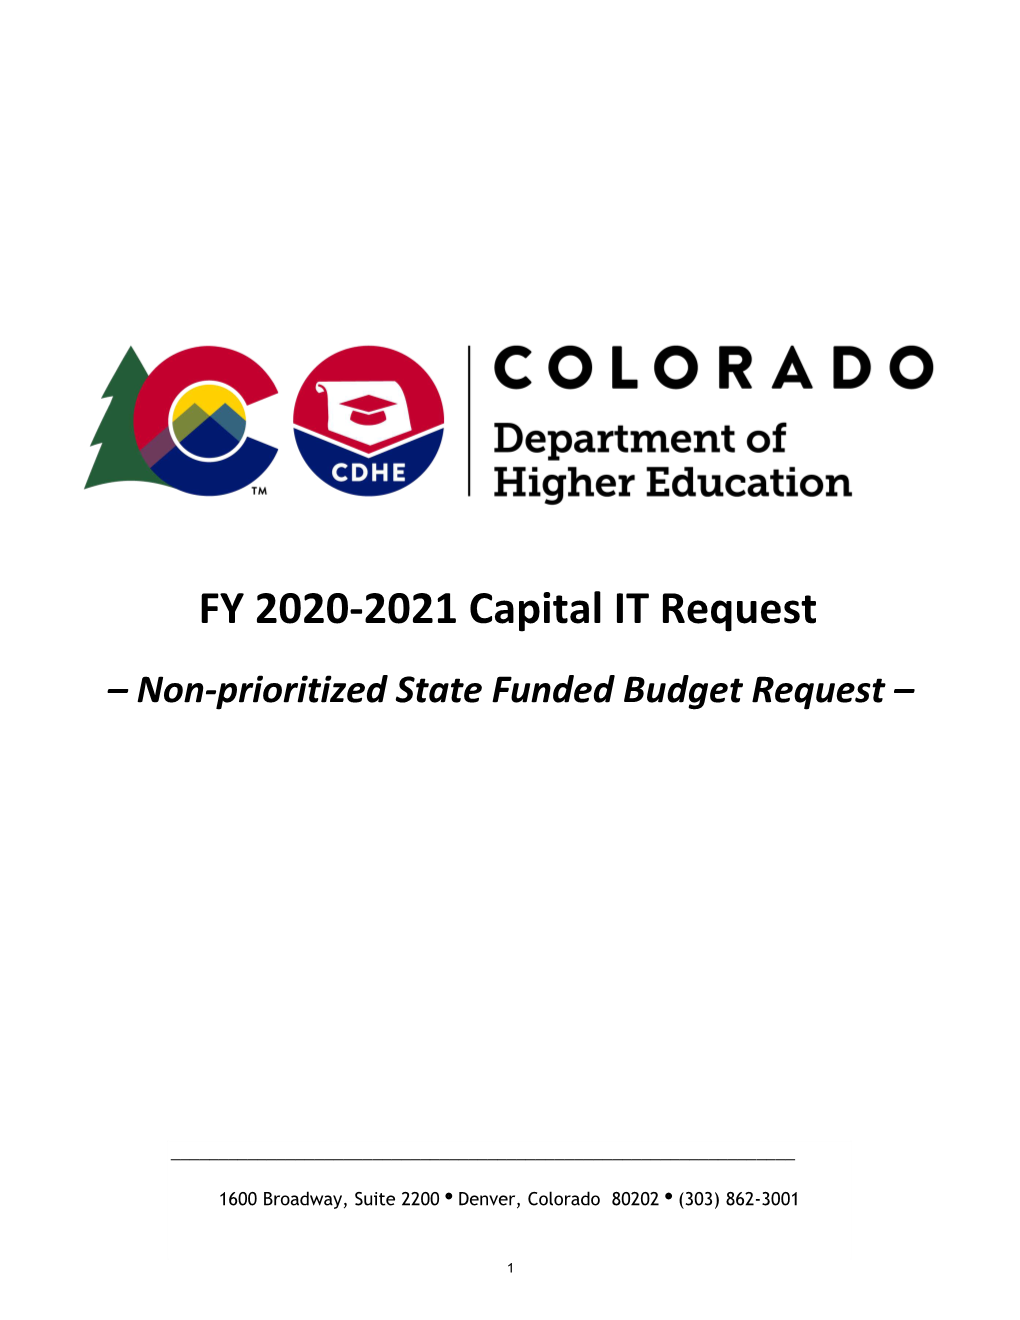 FY 2020-2021 Capital IT Request – Non-Prioritized State Funded Budget Request –